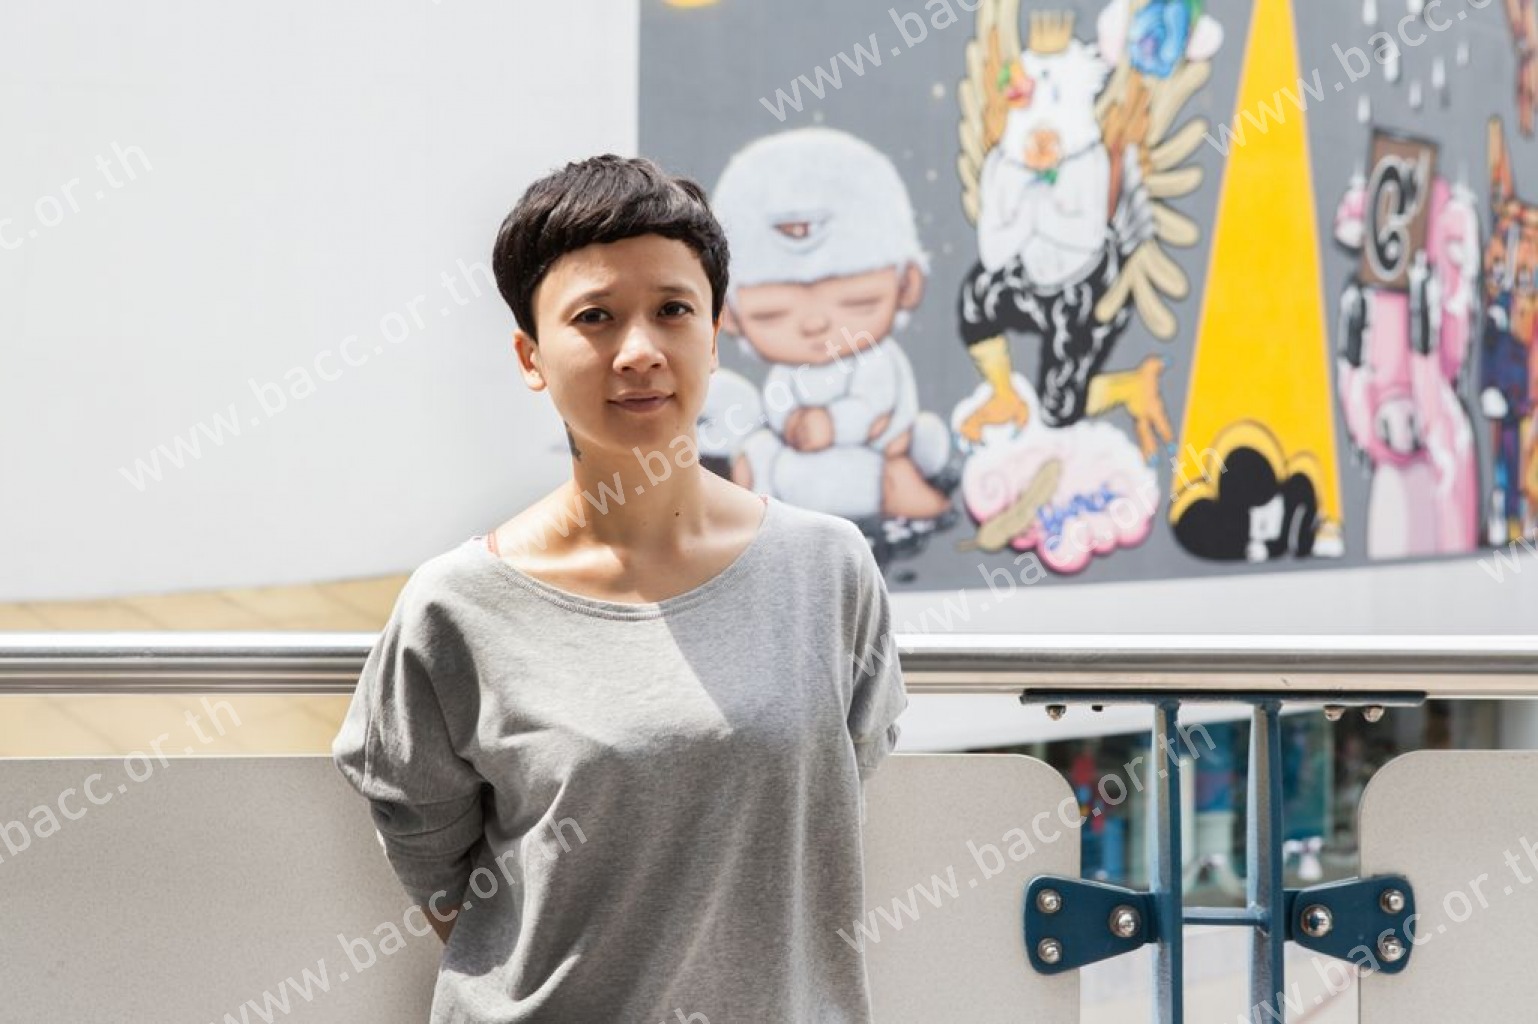 Photo Gallery - Vietnamese New Wave Contemporary Artist, Linh Phuong Nguyen wins Han Nefkens Foundation-BACC Award for Contemporary Art 2017